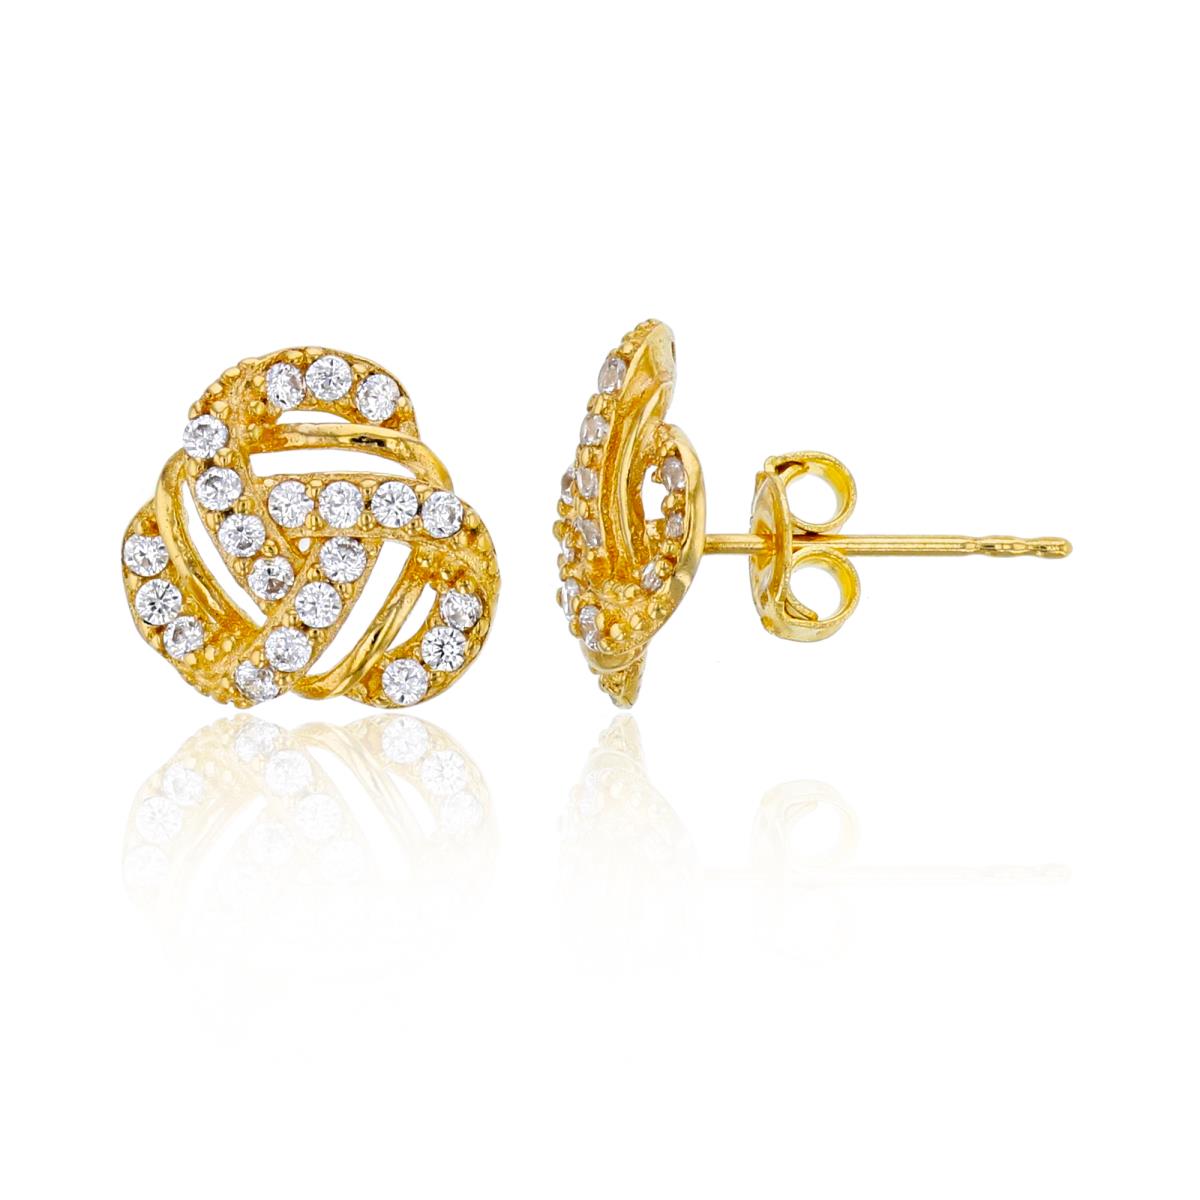 14K Yellow Gold White CZ Knot Stud Earring with 4.5mm Clutch 